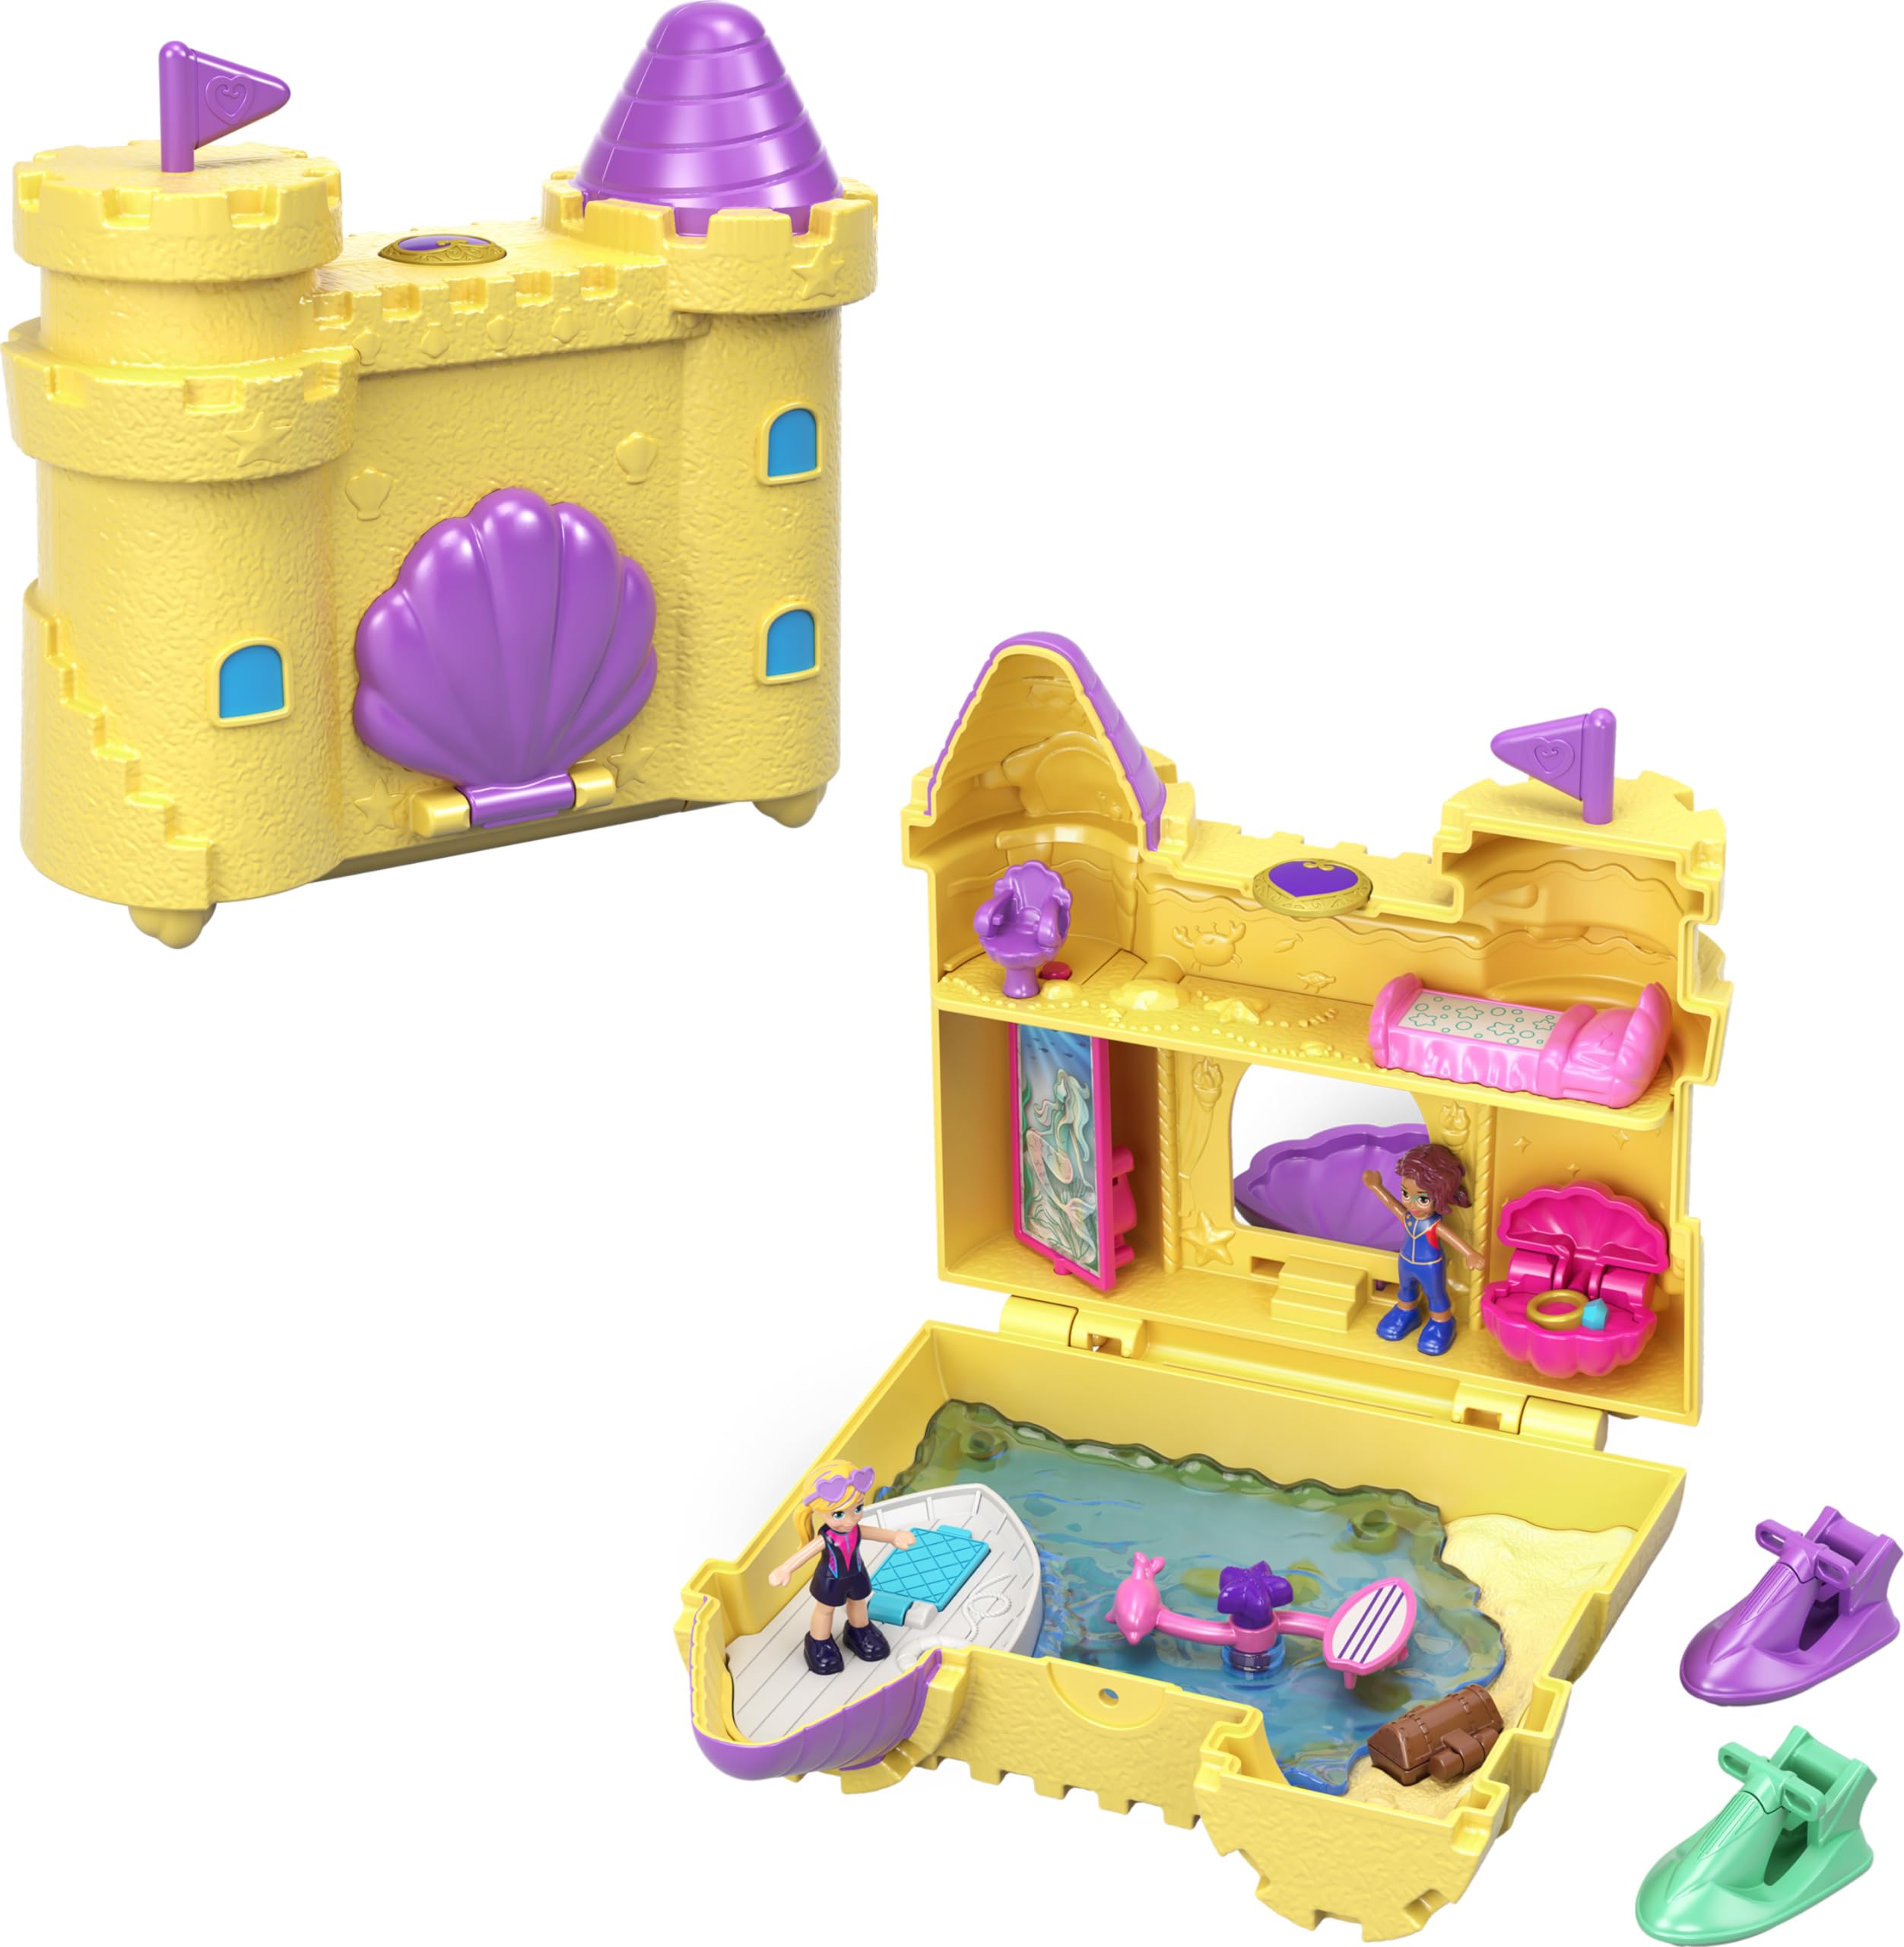 Polly Pocket World Surf ‘N’ Sandventure Playset: w/ 2 Micro Dolls, Dolphin Pet & Water Play Accessories $6.41 + Free Shipping w/ Prime or on $35+